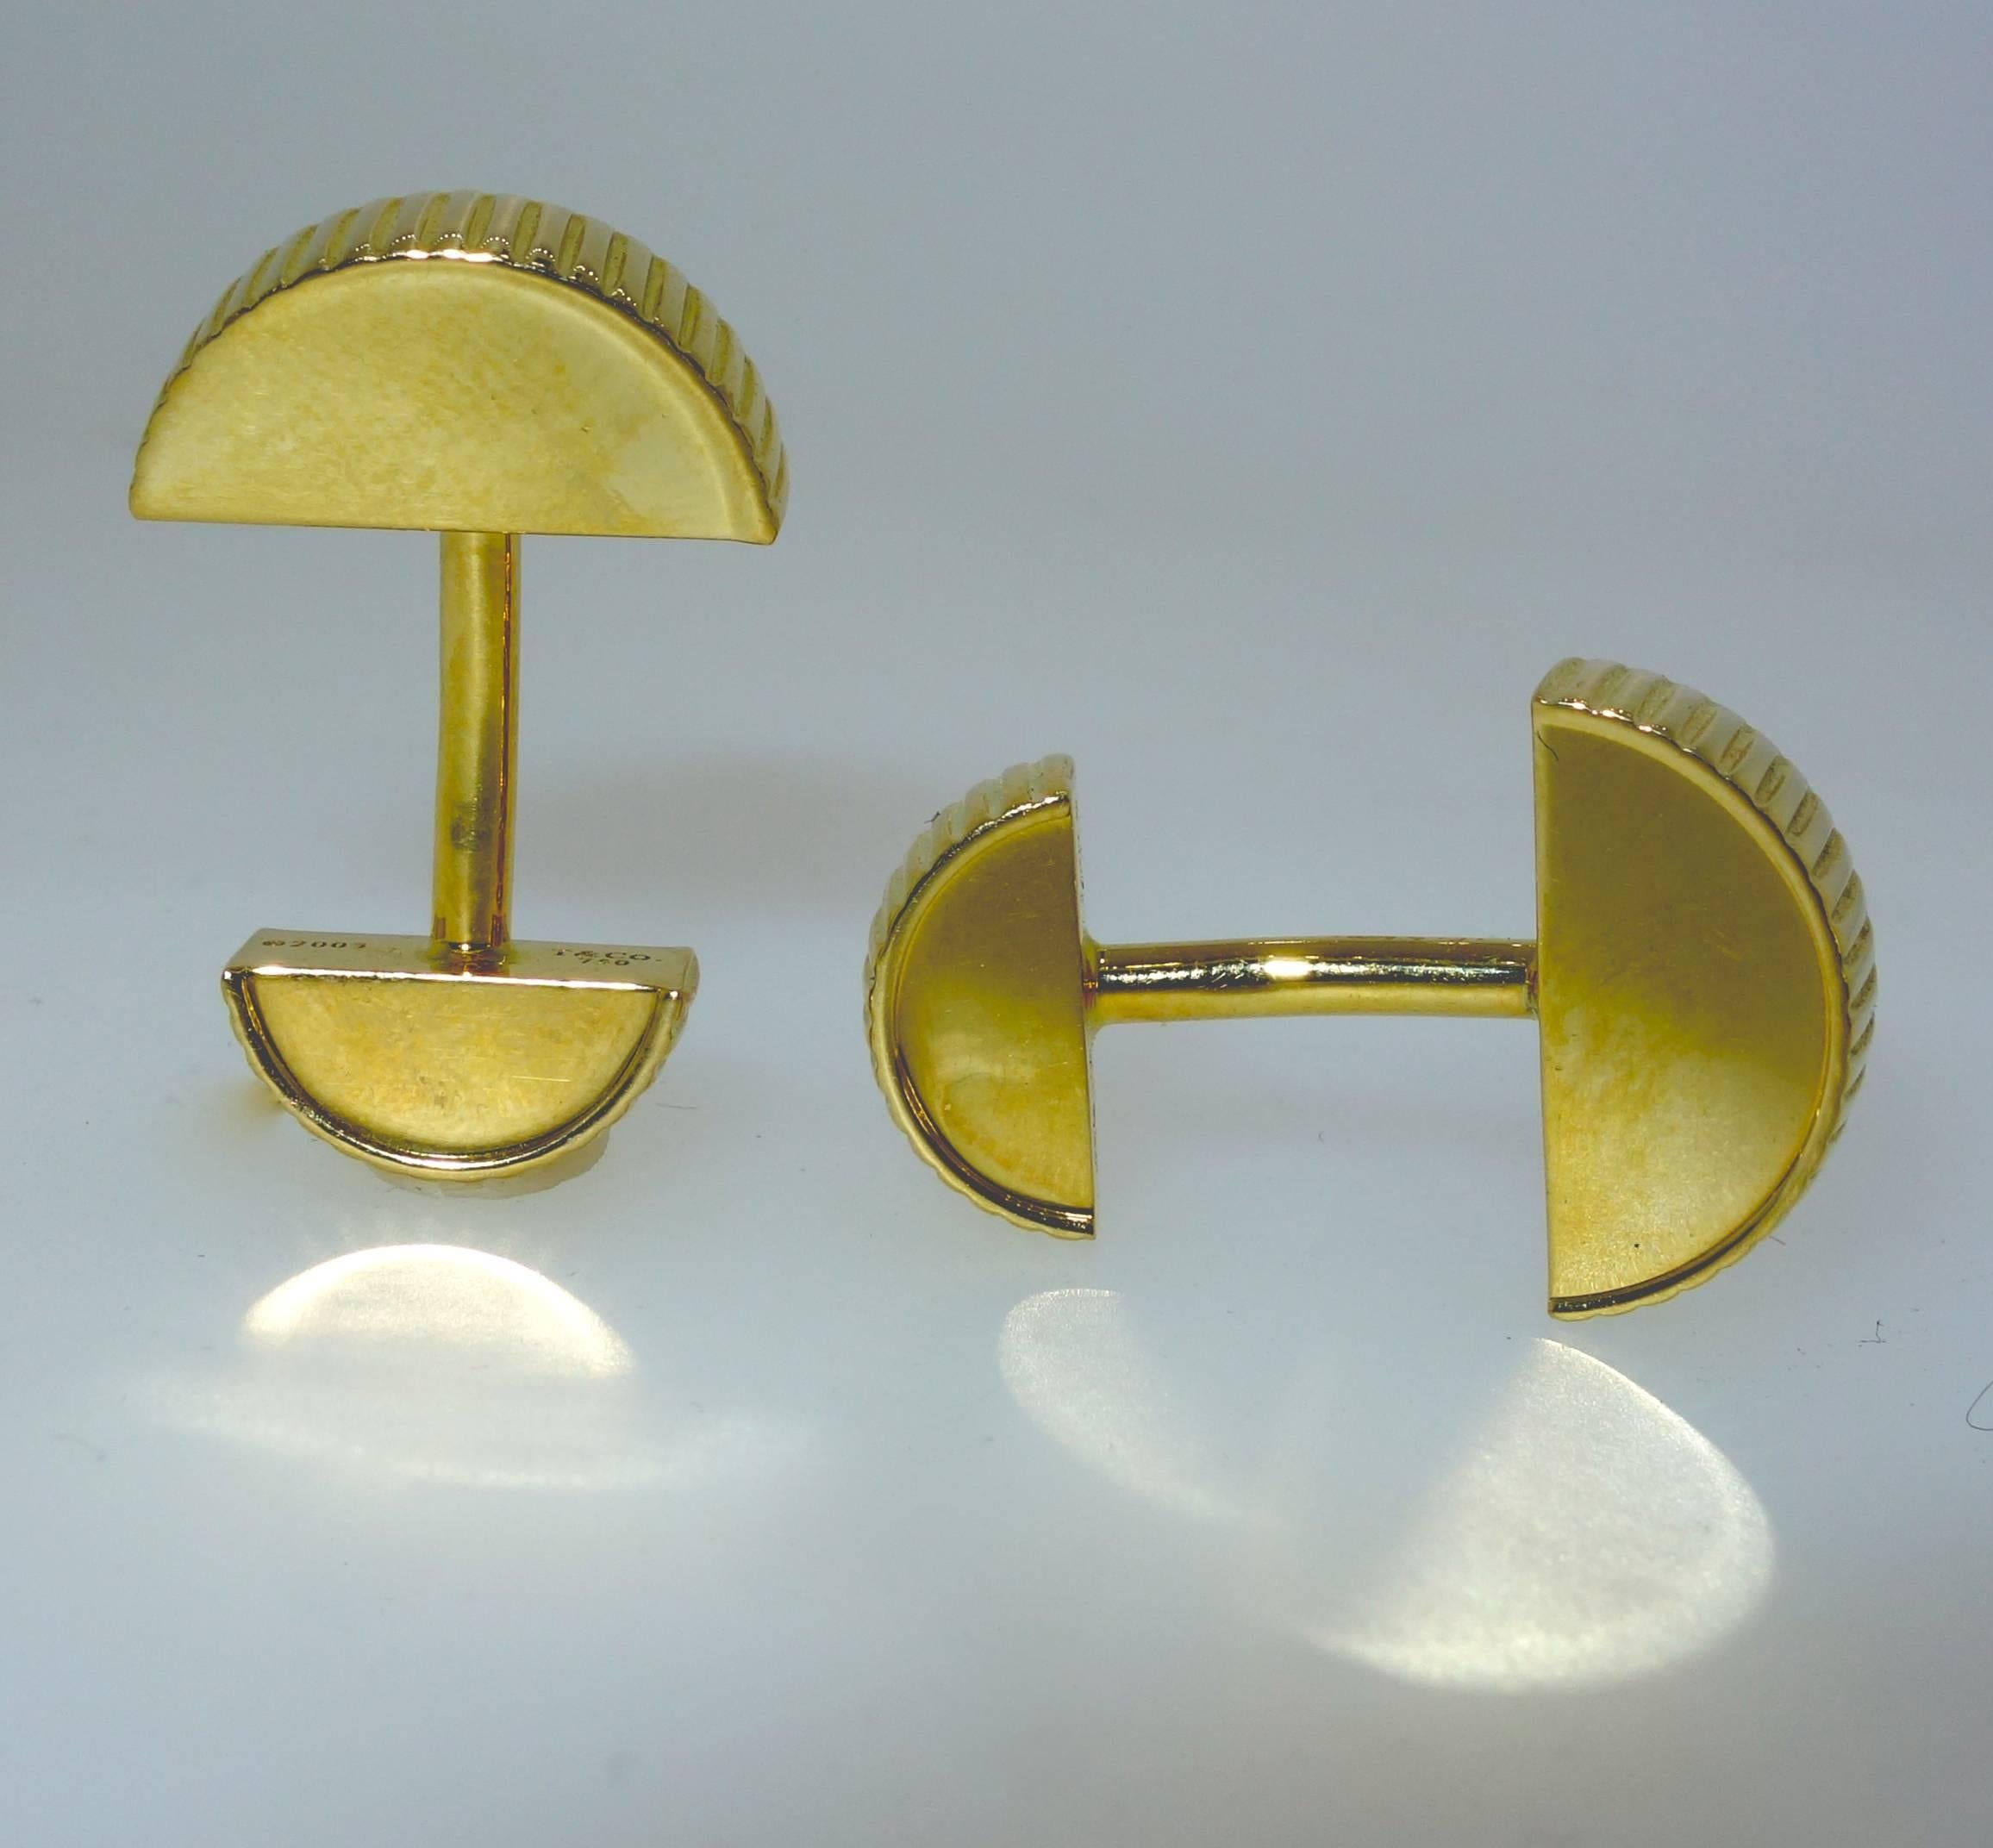 Tiffany & Co., signed and numbered, cufflinks of an usual design, circa 1960.  Easy to put on, striking with a classic motif.